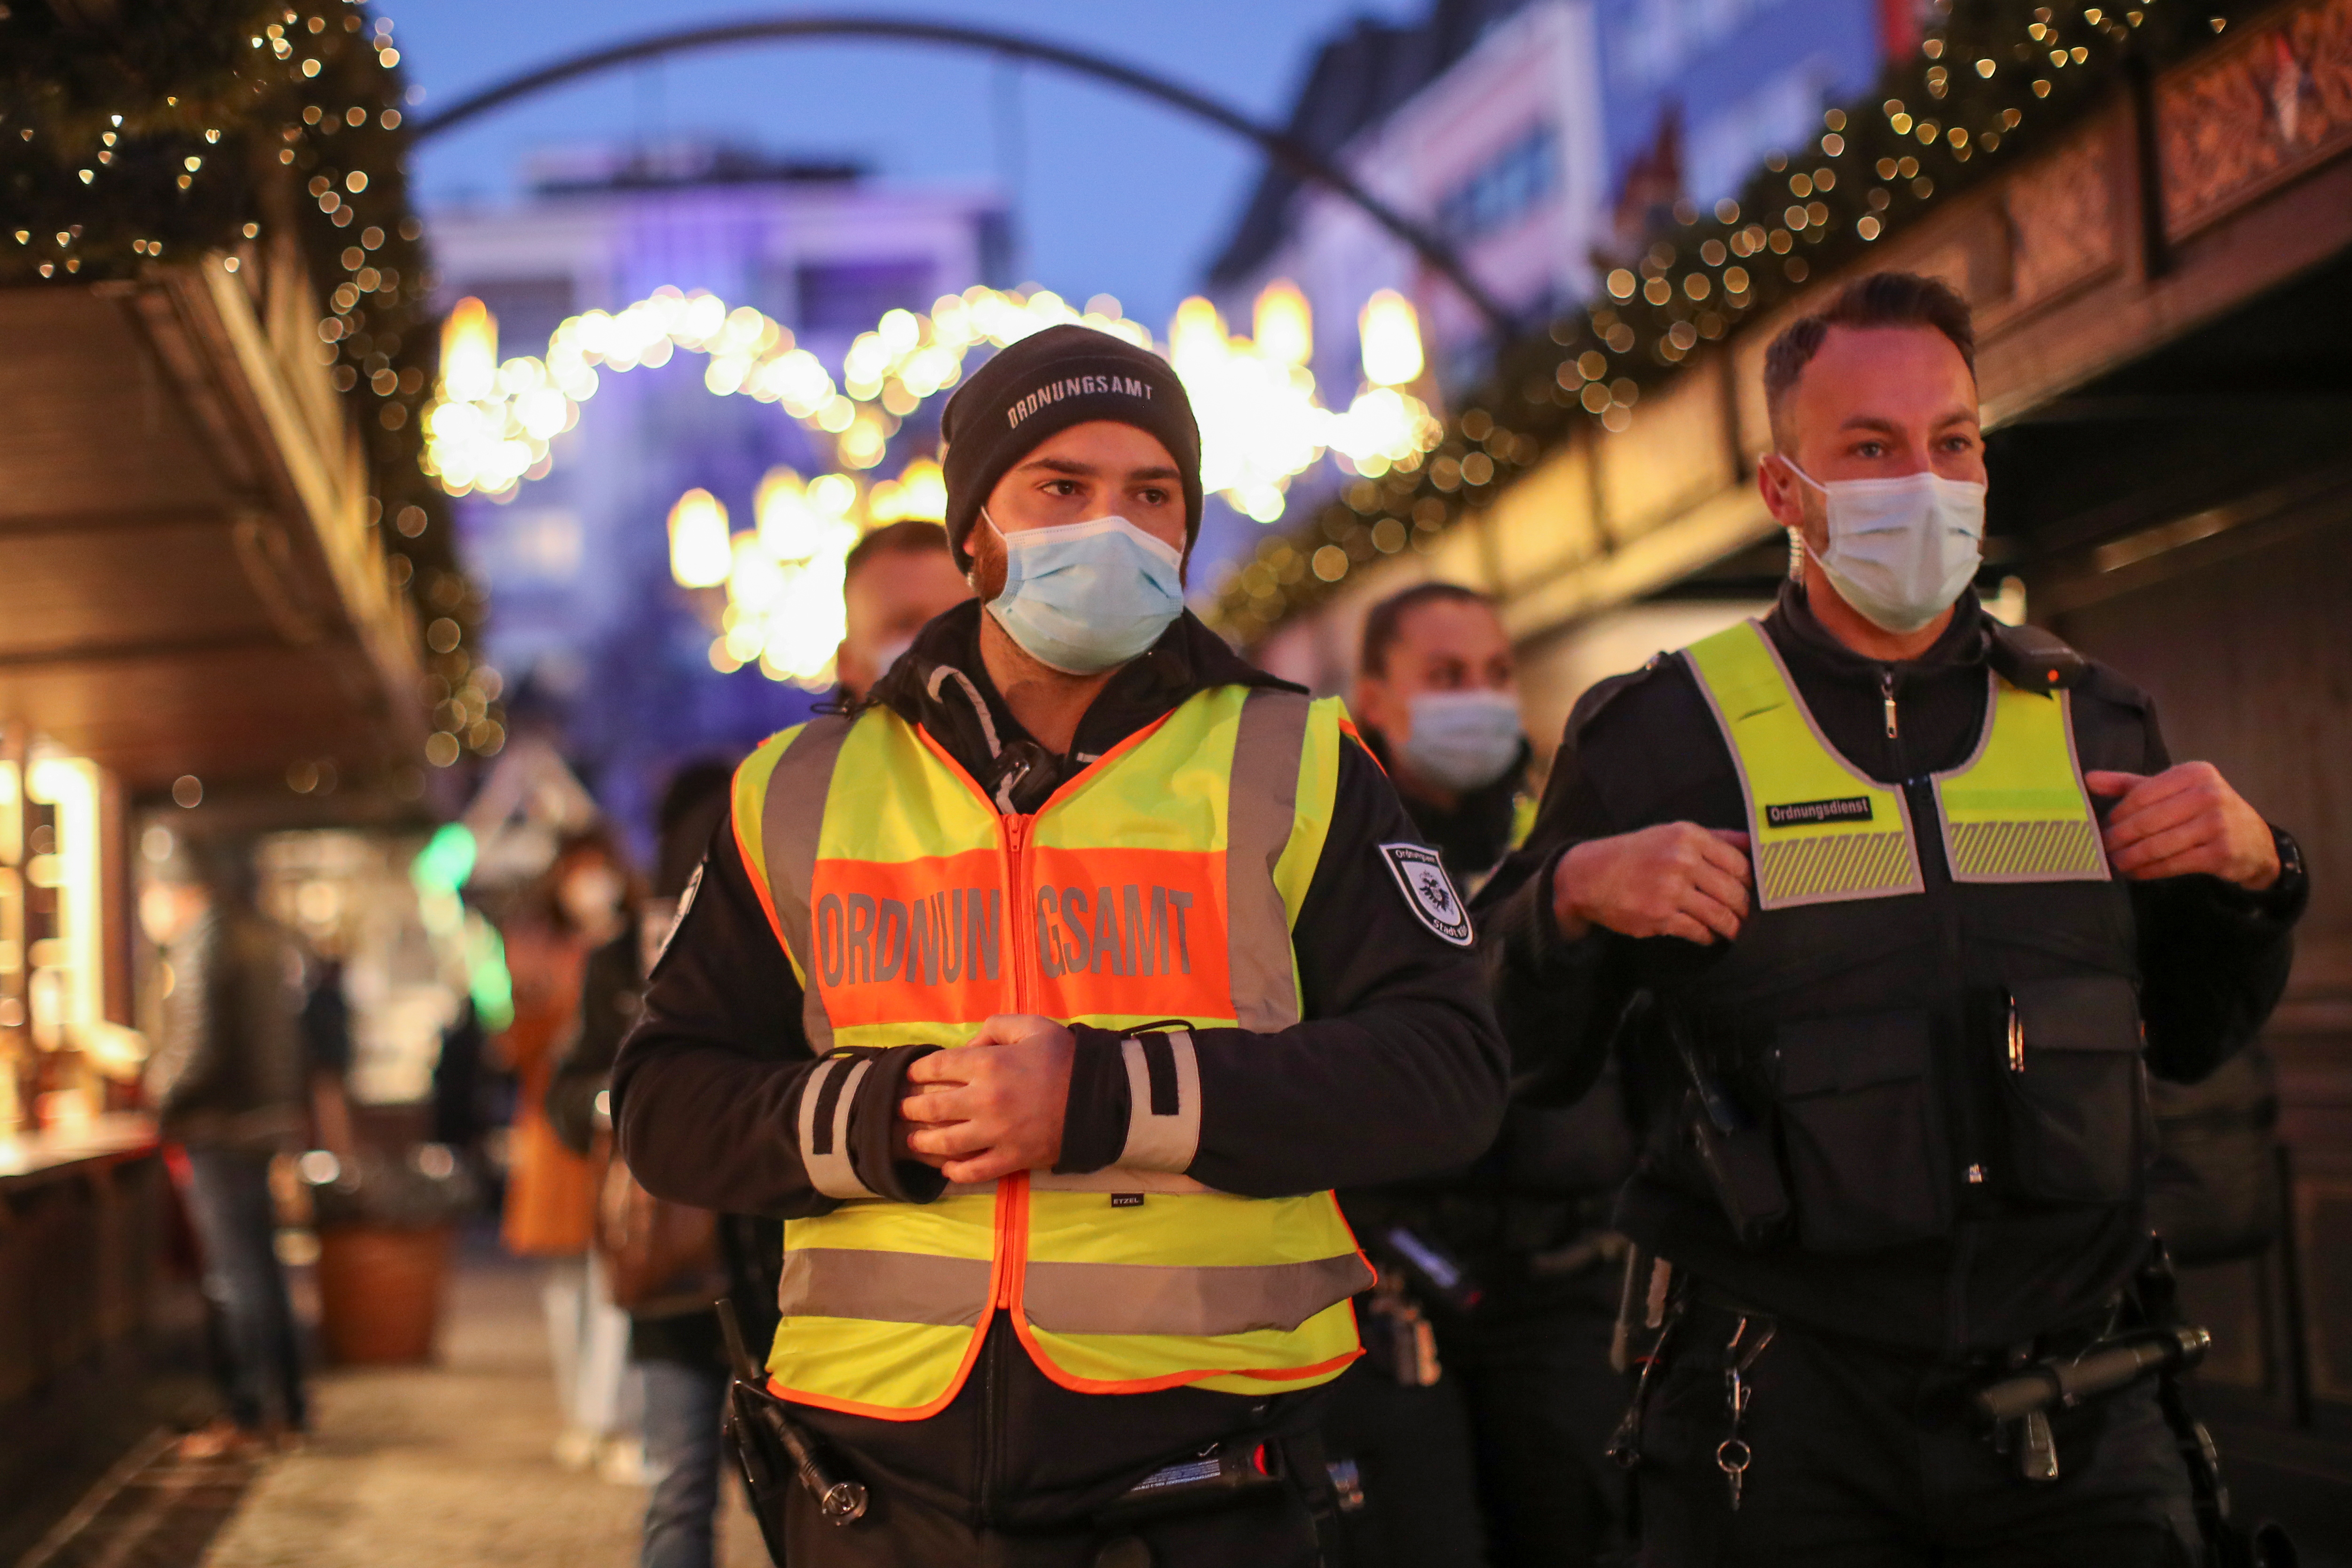 Members of the public order office walk at a Christmas market, where they control the '2G' rule which allows only those vaccinated or recovered from the coronavirus disease (COVID-19) to visit, in Cologne, Germany, November 22, 2021. REUTERS/Thilo Schmuelgen